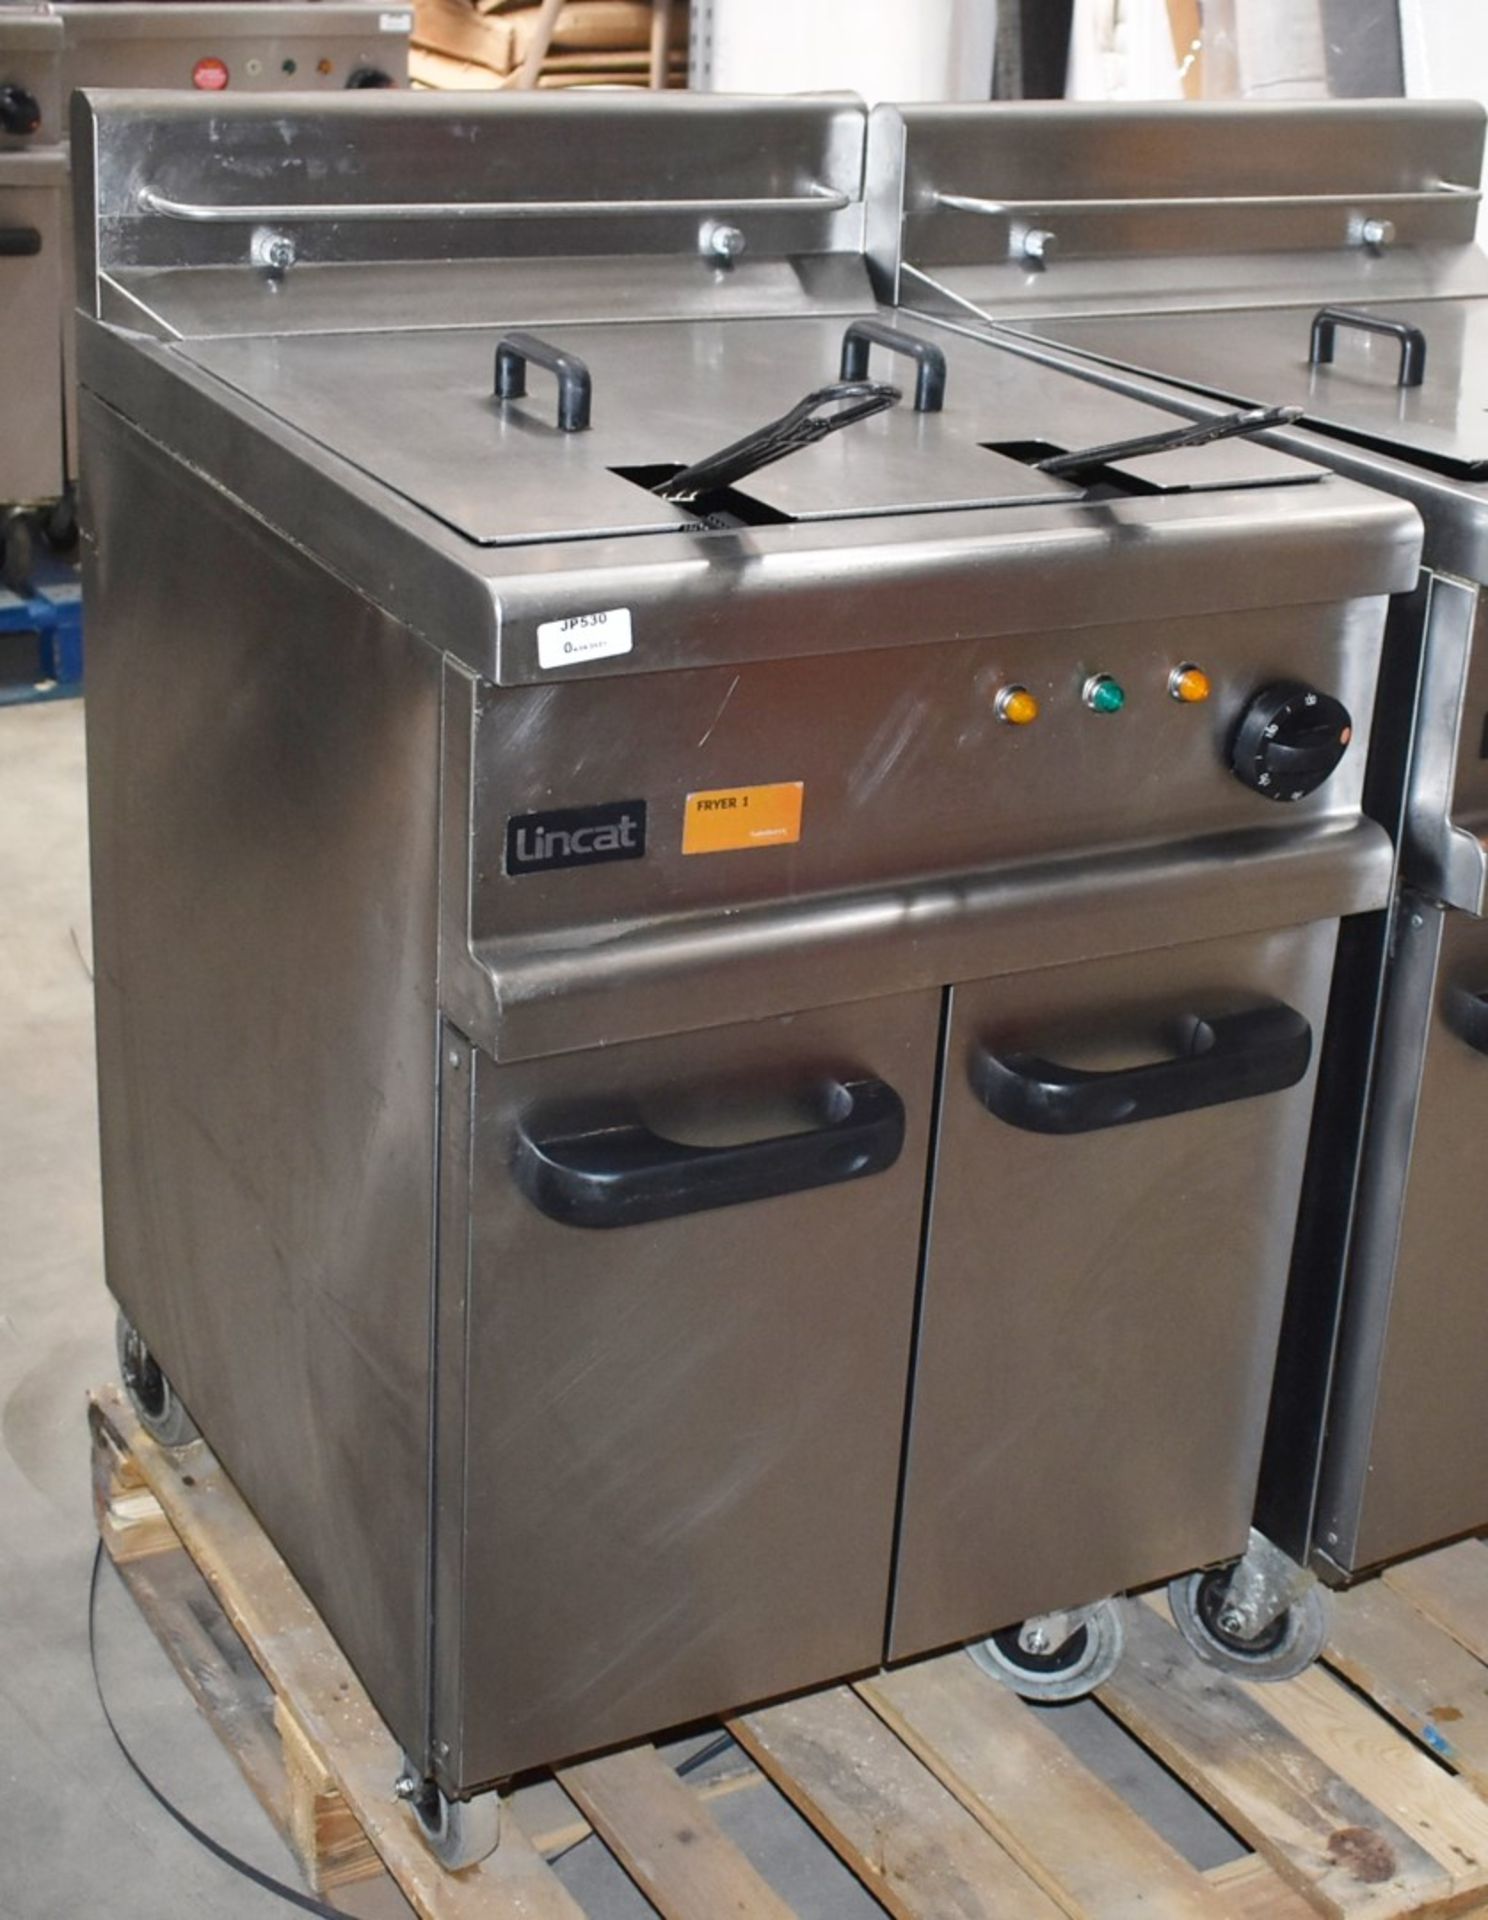 1 x Lincat Opus 700 OE7113 Single Large Tank Electric Fryer With Built In Filteration - 240V / 3PH P - Image 2 of 8